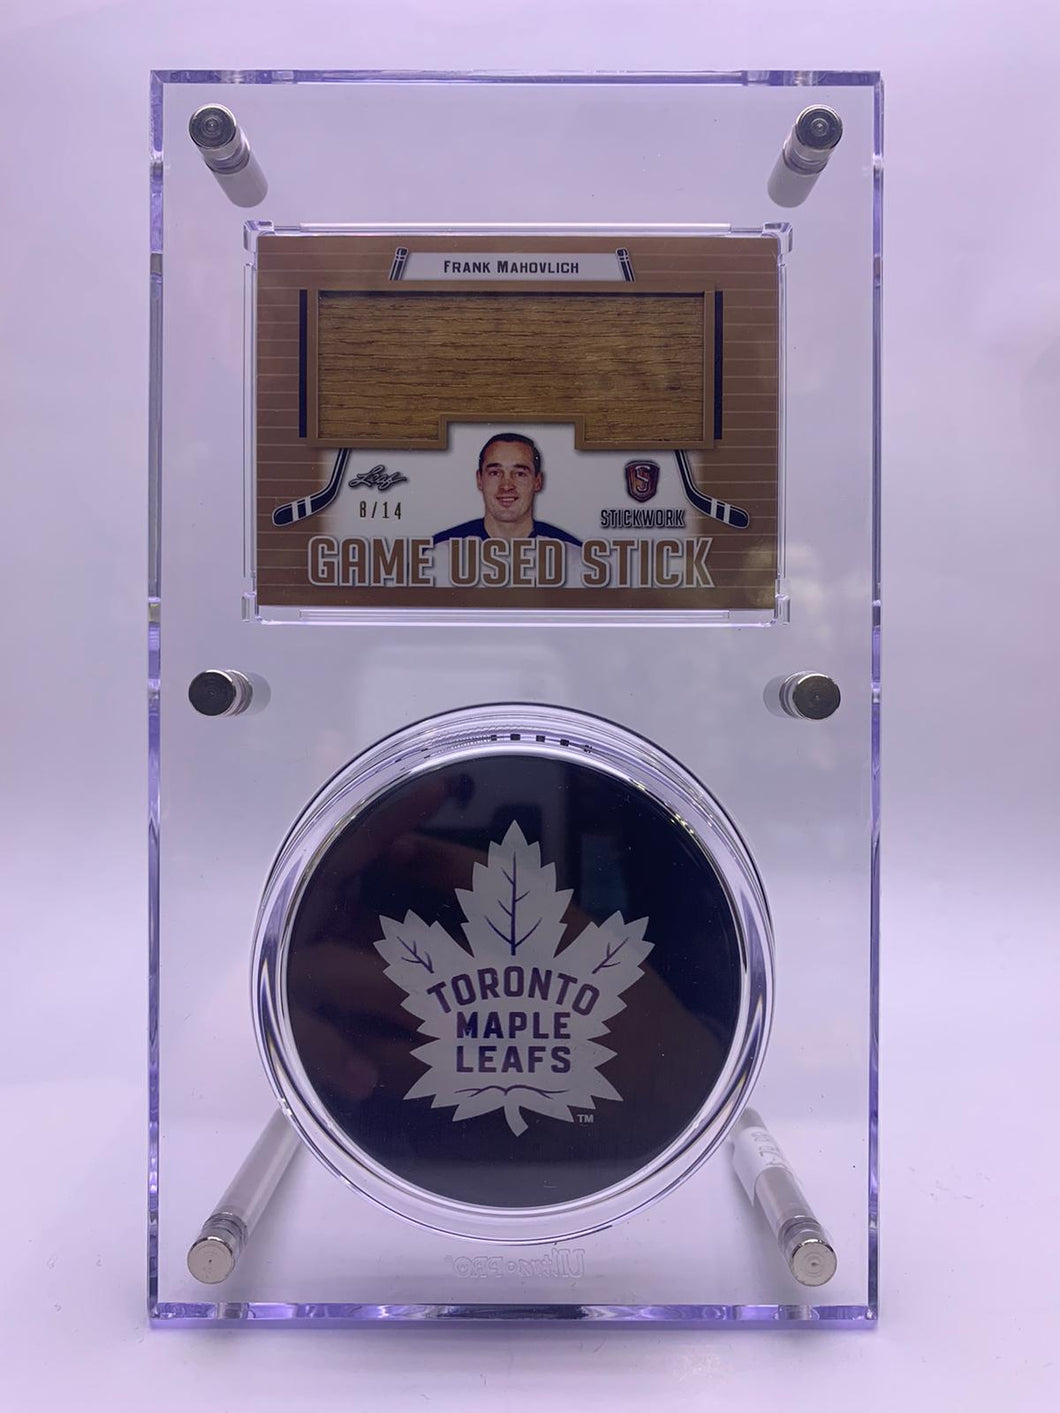 Toronto Maple Leafs Frank Mahovlich Game Used Stick Collectible Card